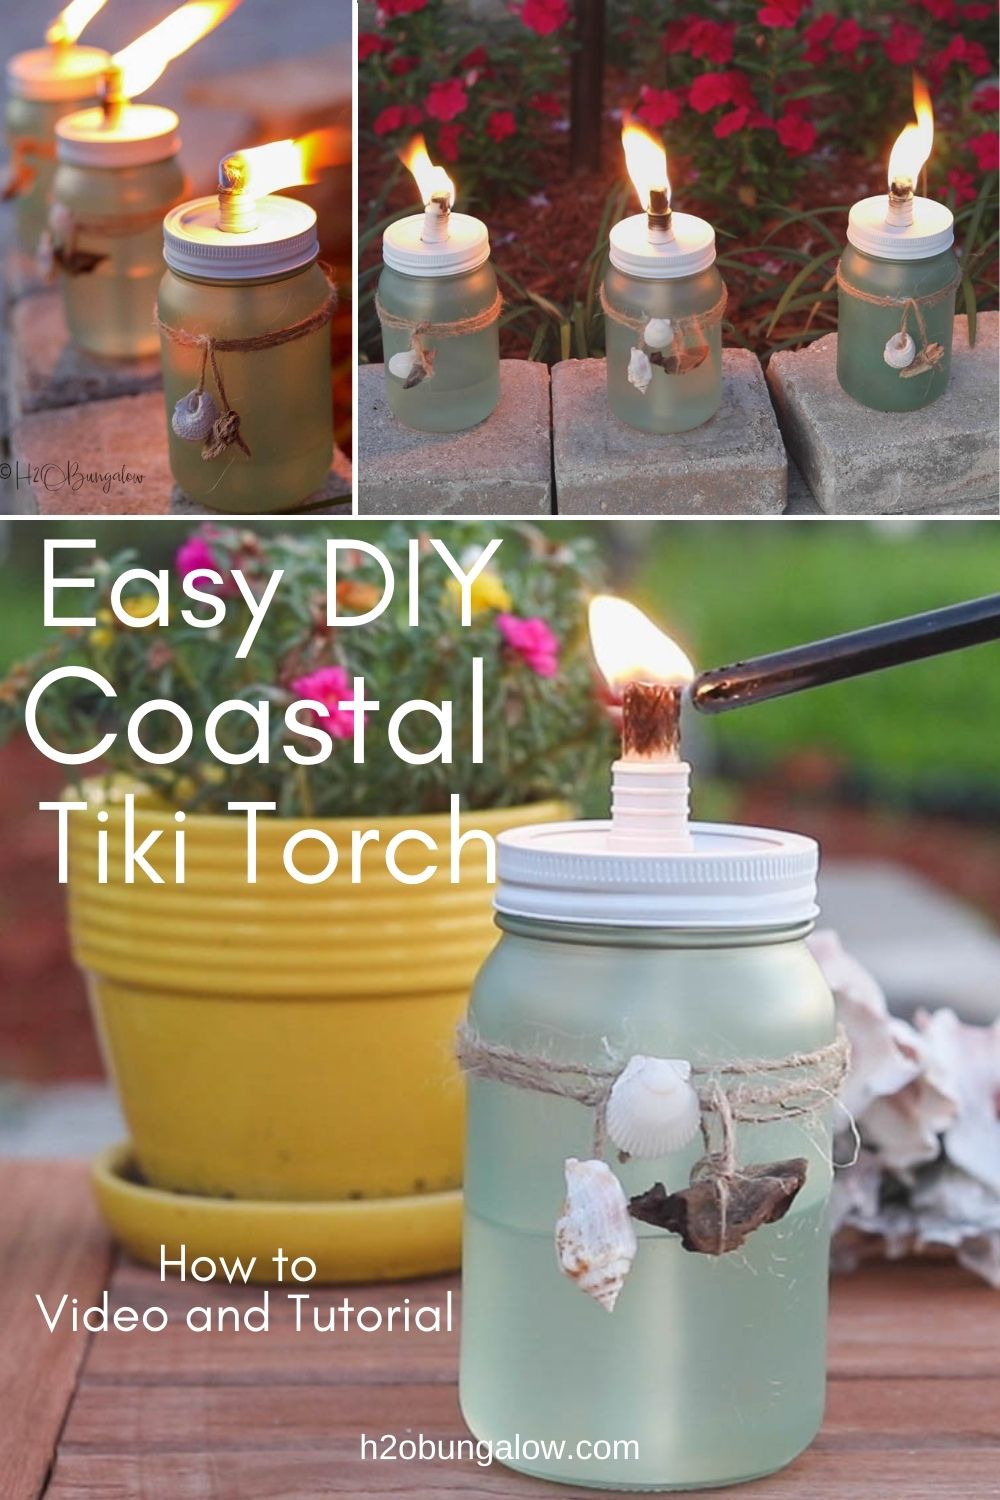 image collage of DIY tiki torches with text overlay "Easy DIY Tiki Torch" video and tutorial